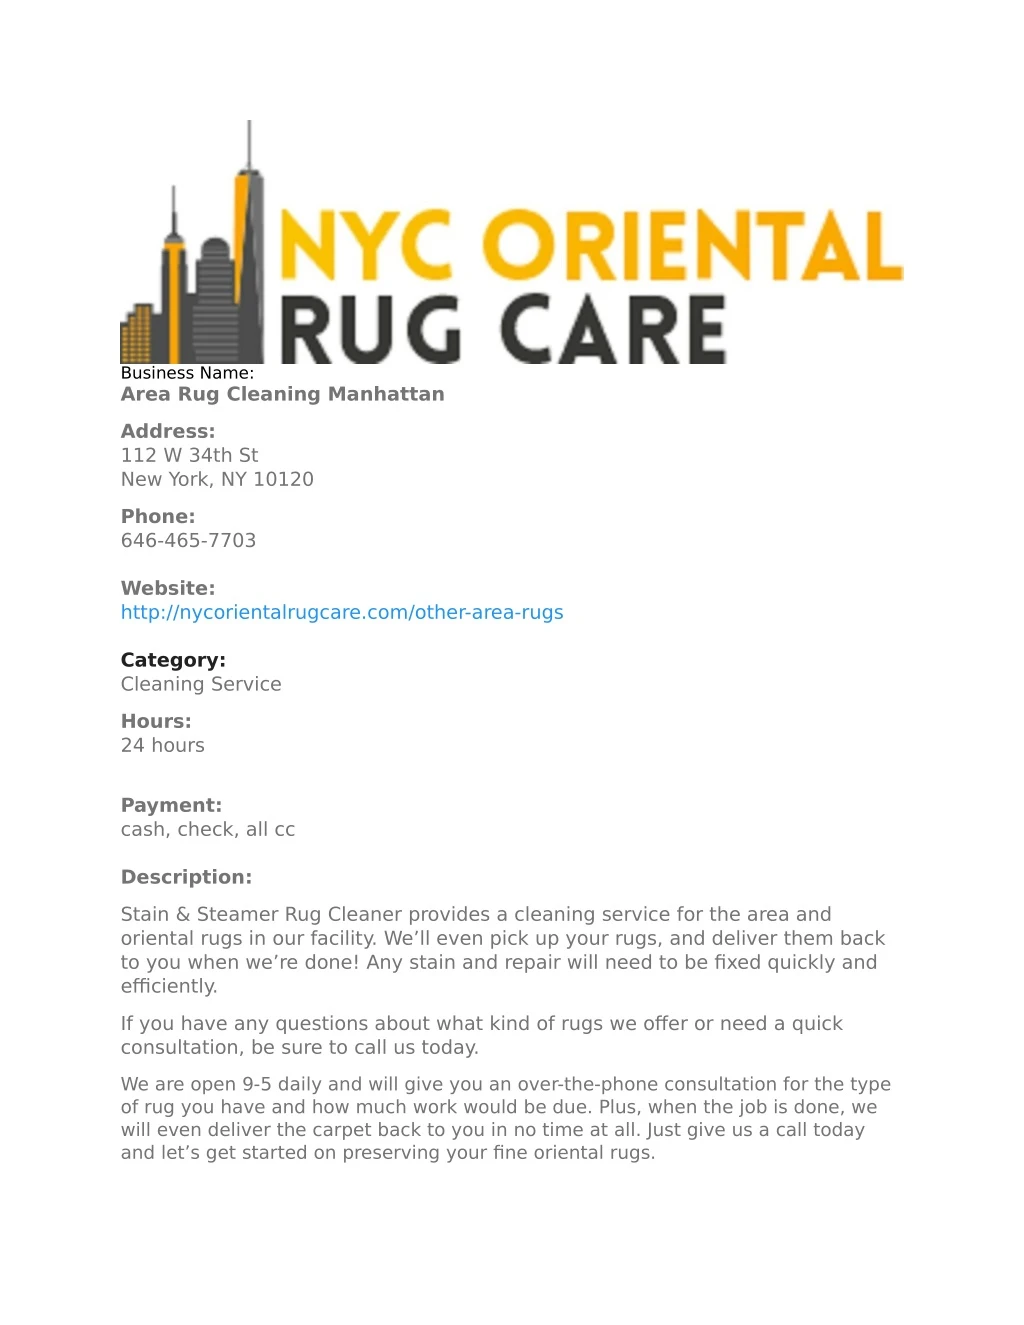 business name area rug cleaning manhattan